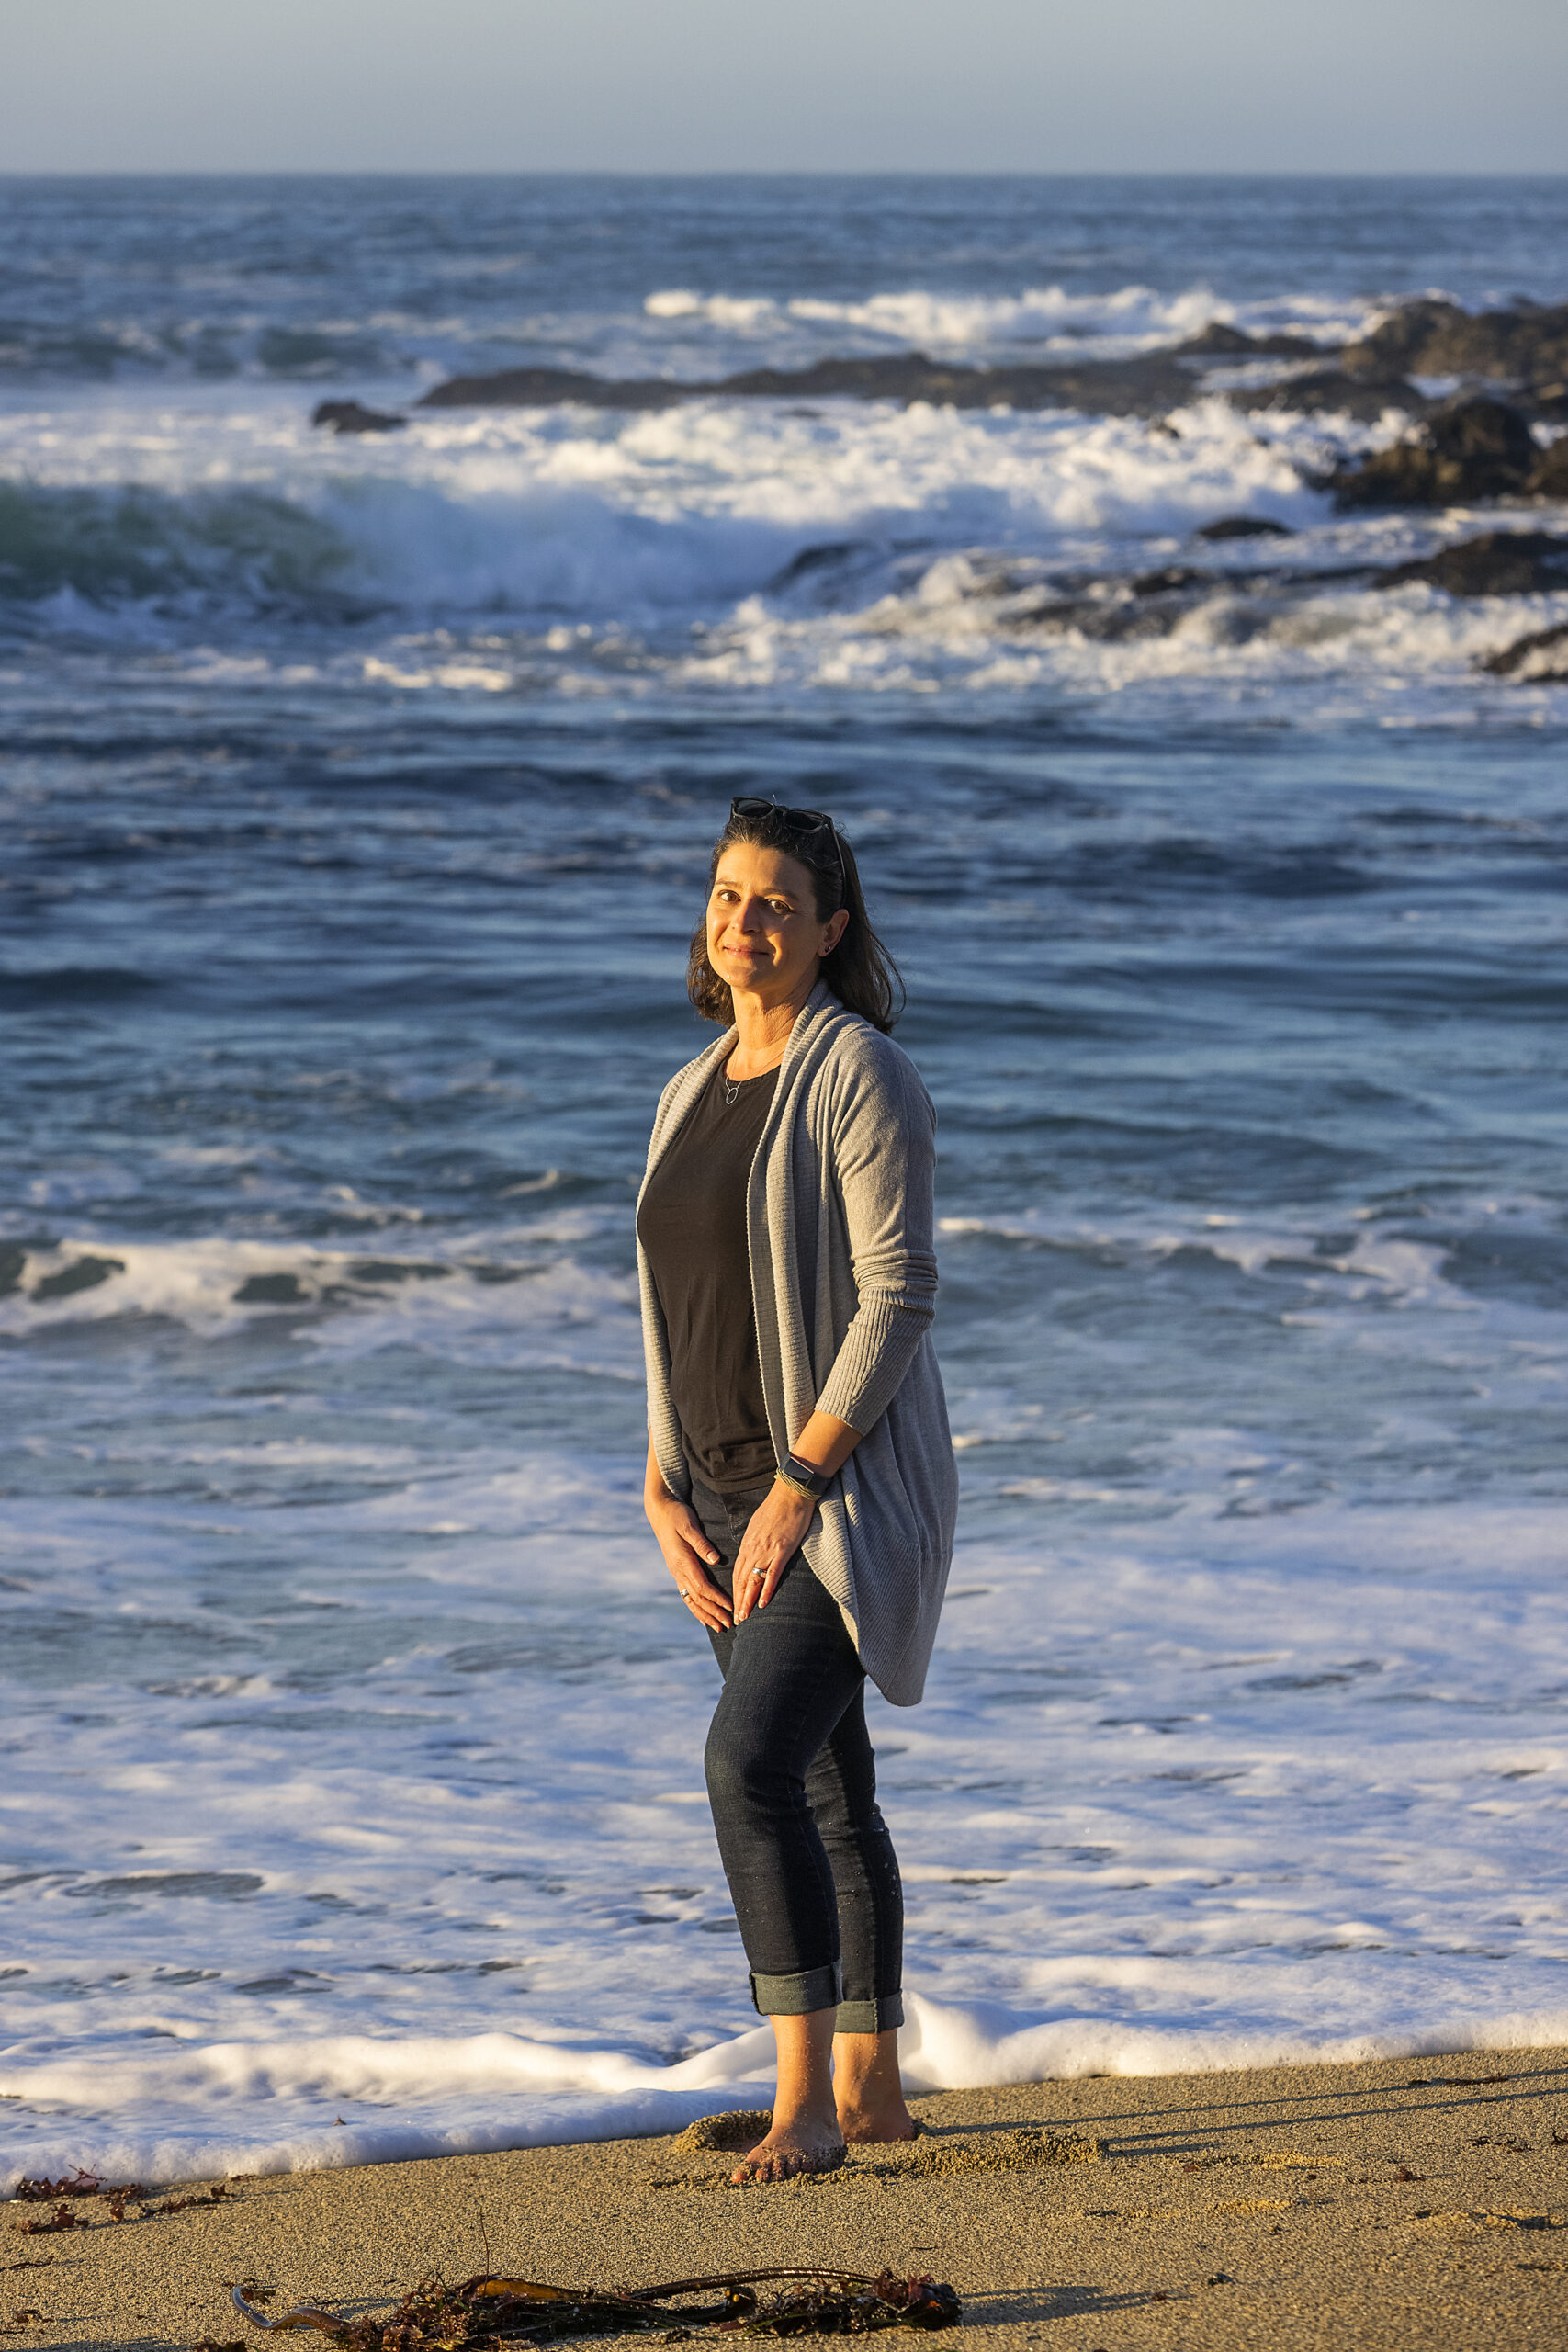 Tessa Hill studies the way our oceans adapt to warmer temperatures—and helps her students think more critically about climate change. (John Burgess/The Press Democrat)